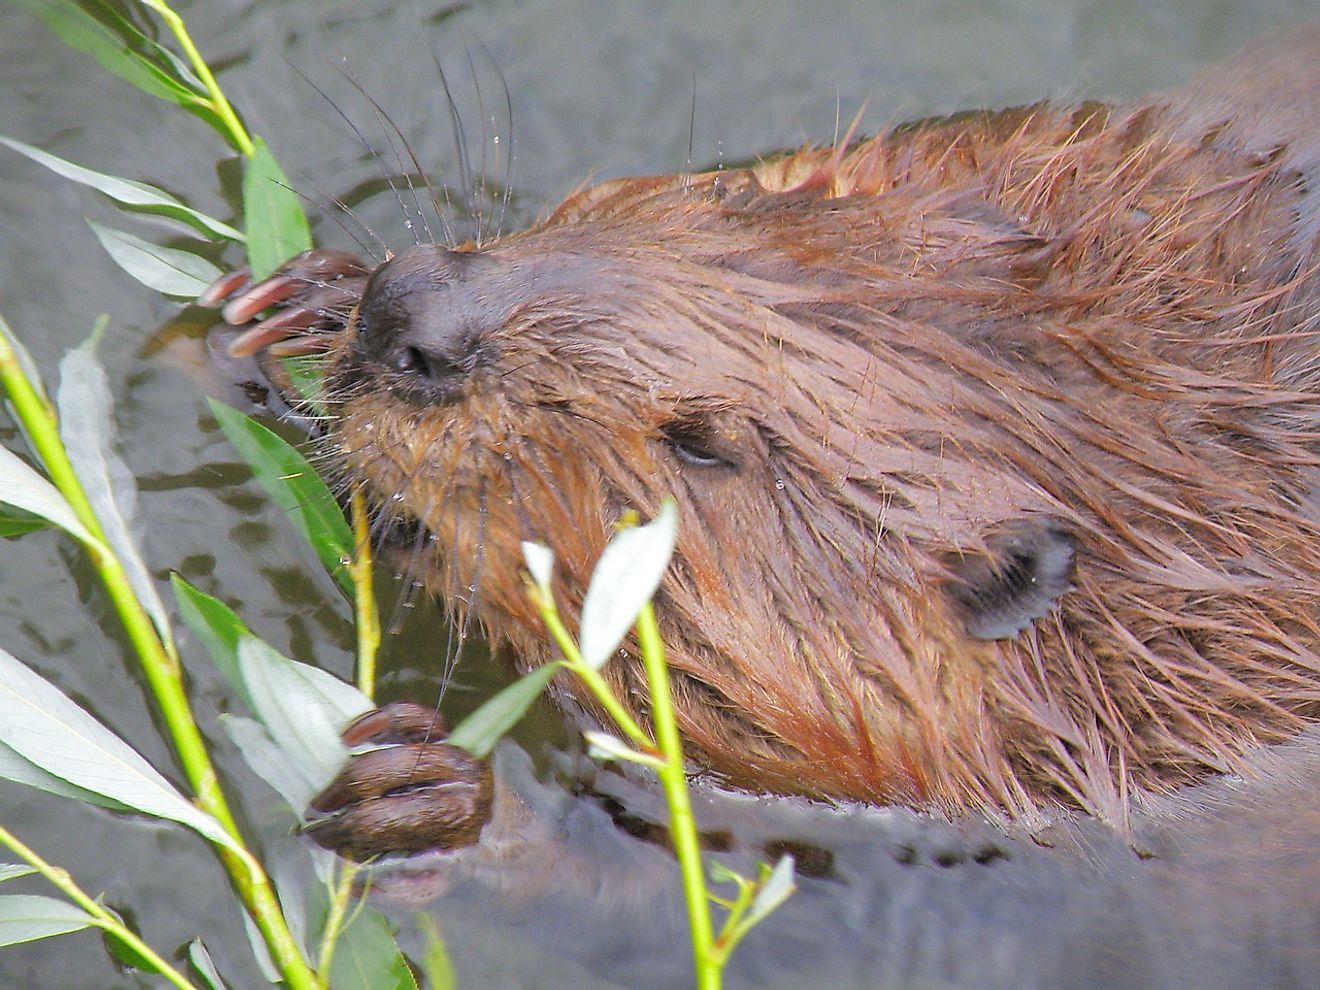 Beavers spend much of their time building the homes in which they will raise their young and stay away from hungry predators.